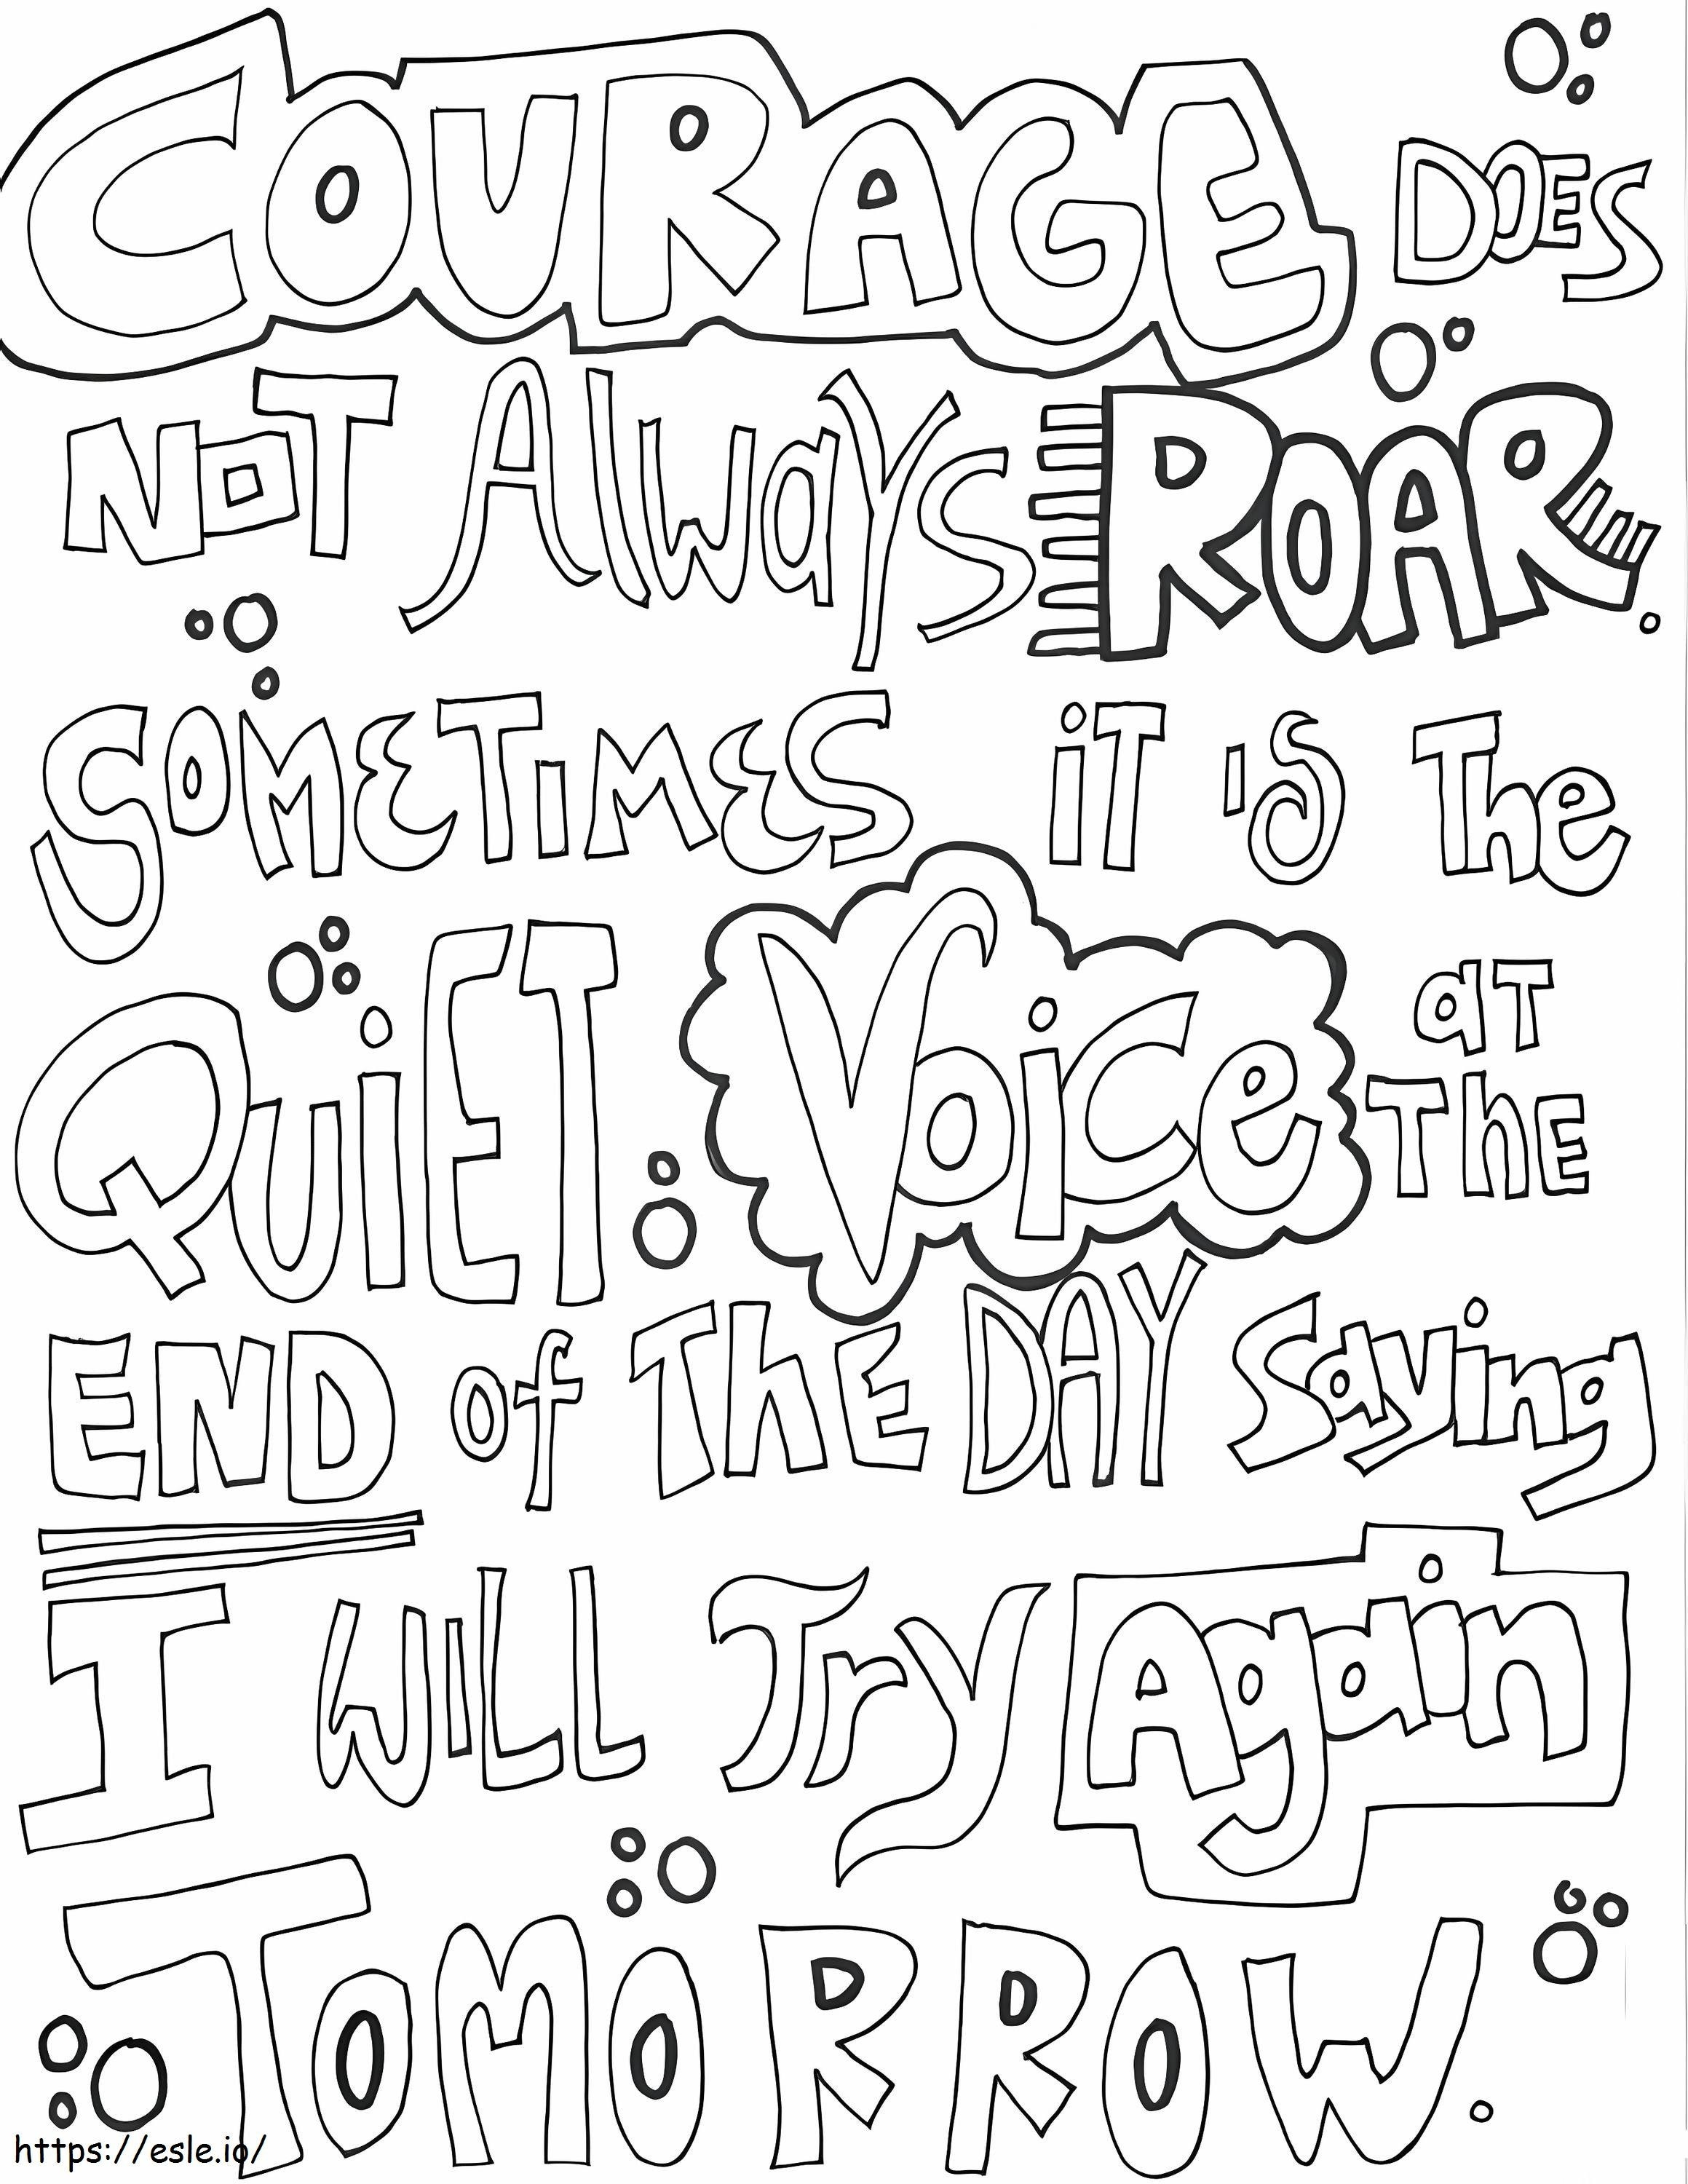 Printable Courage Quote coloring page